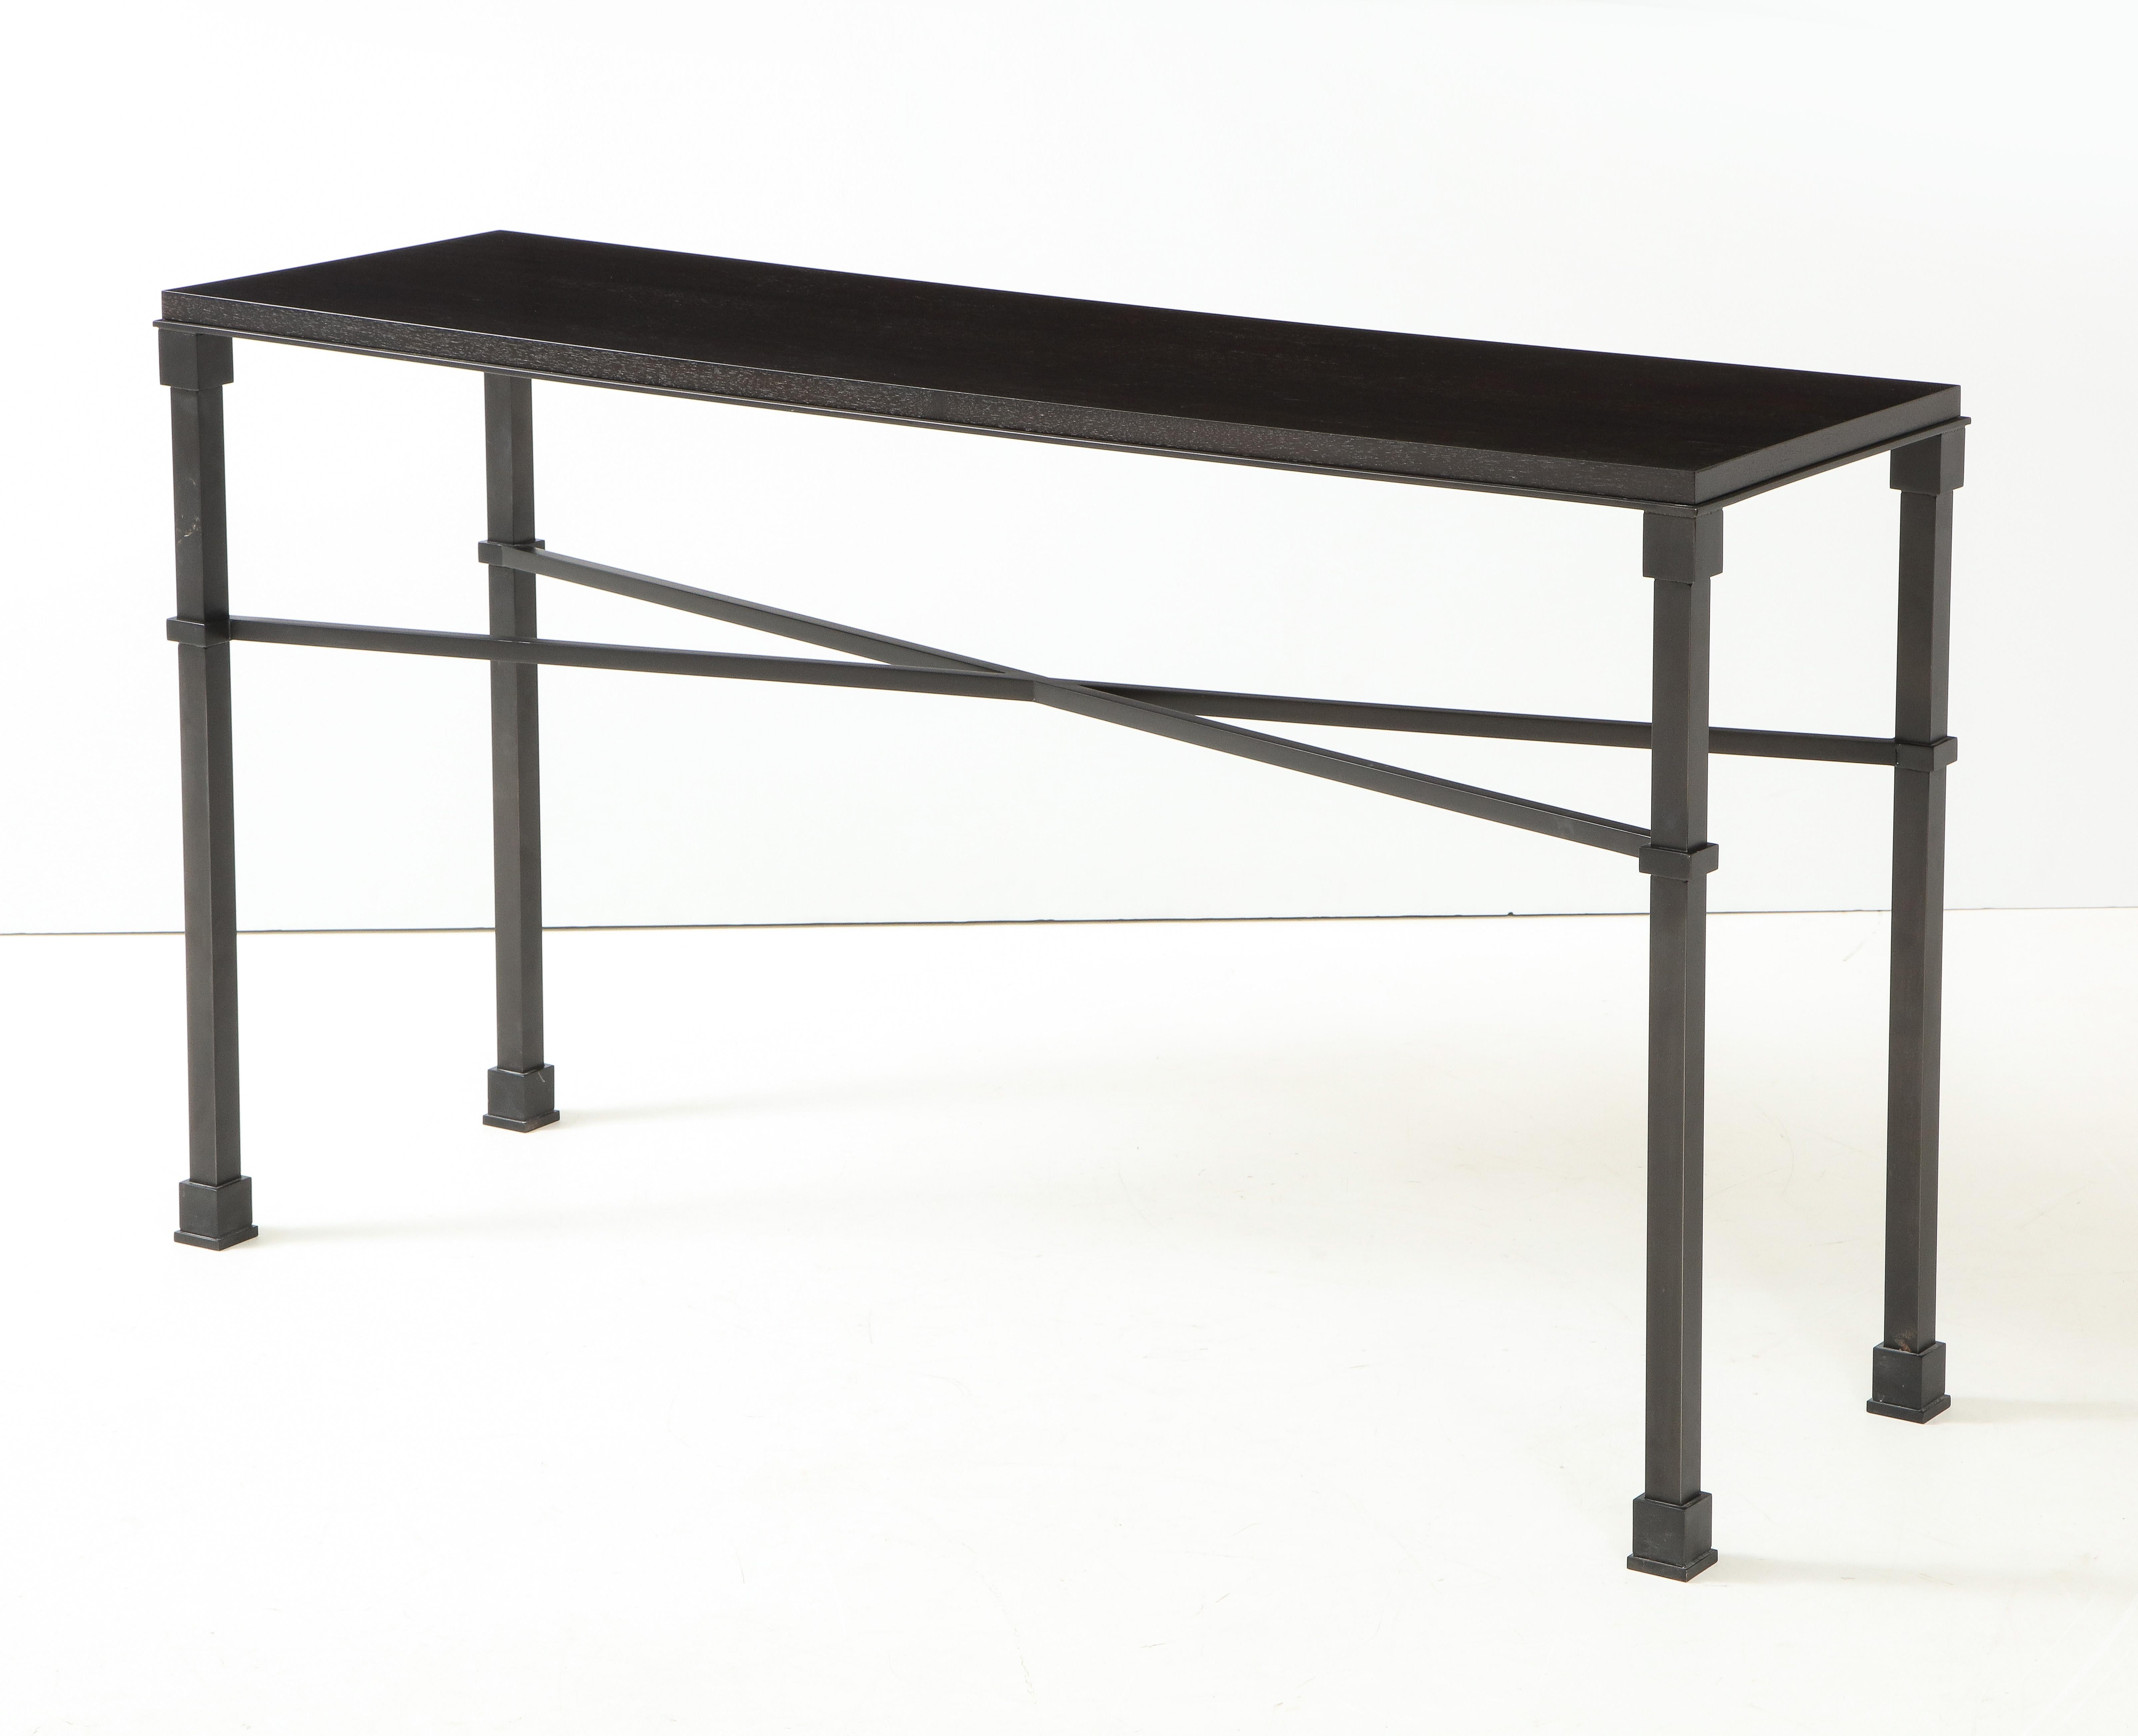 Made to order 'Quinet' console & end tables
Hand made metal base, ebonized wood top
Measures: H: 32 D: 18 W: 60 inches 

This console & table in stock.